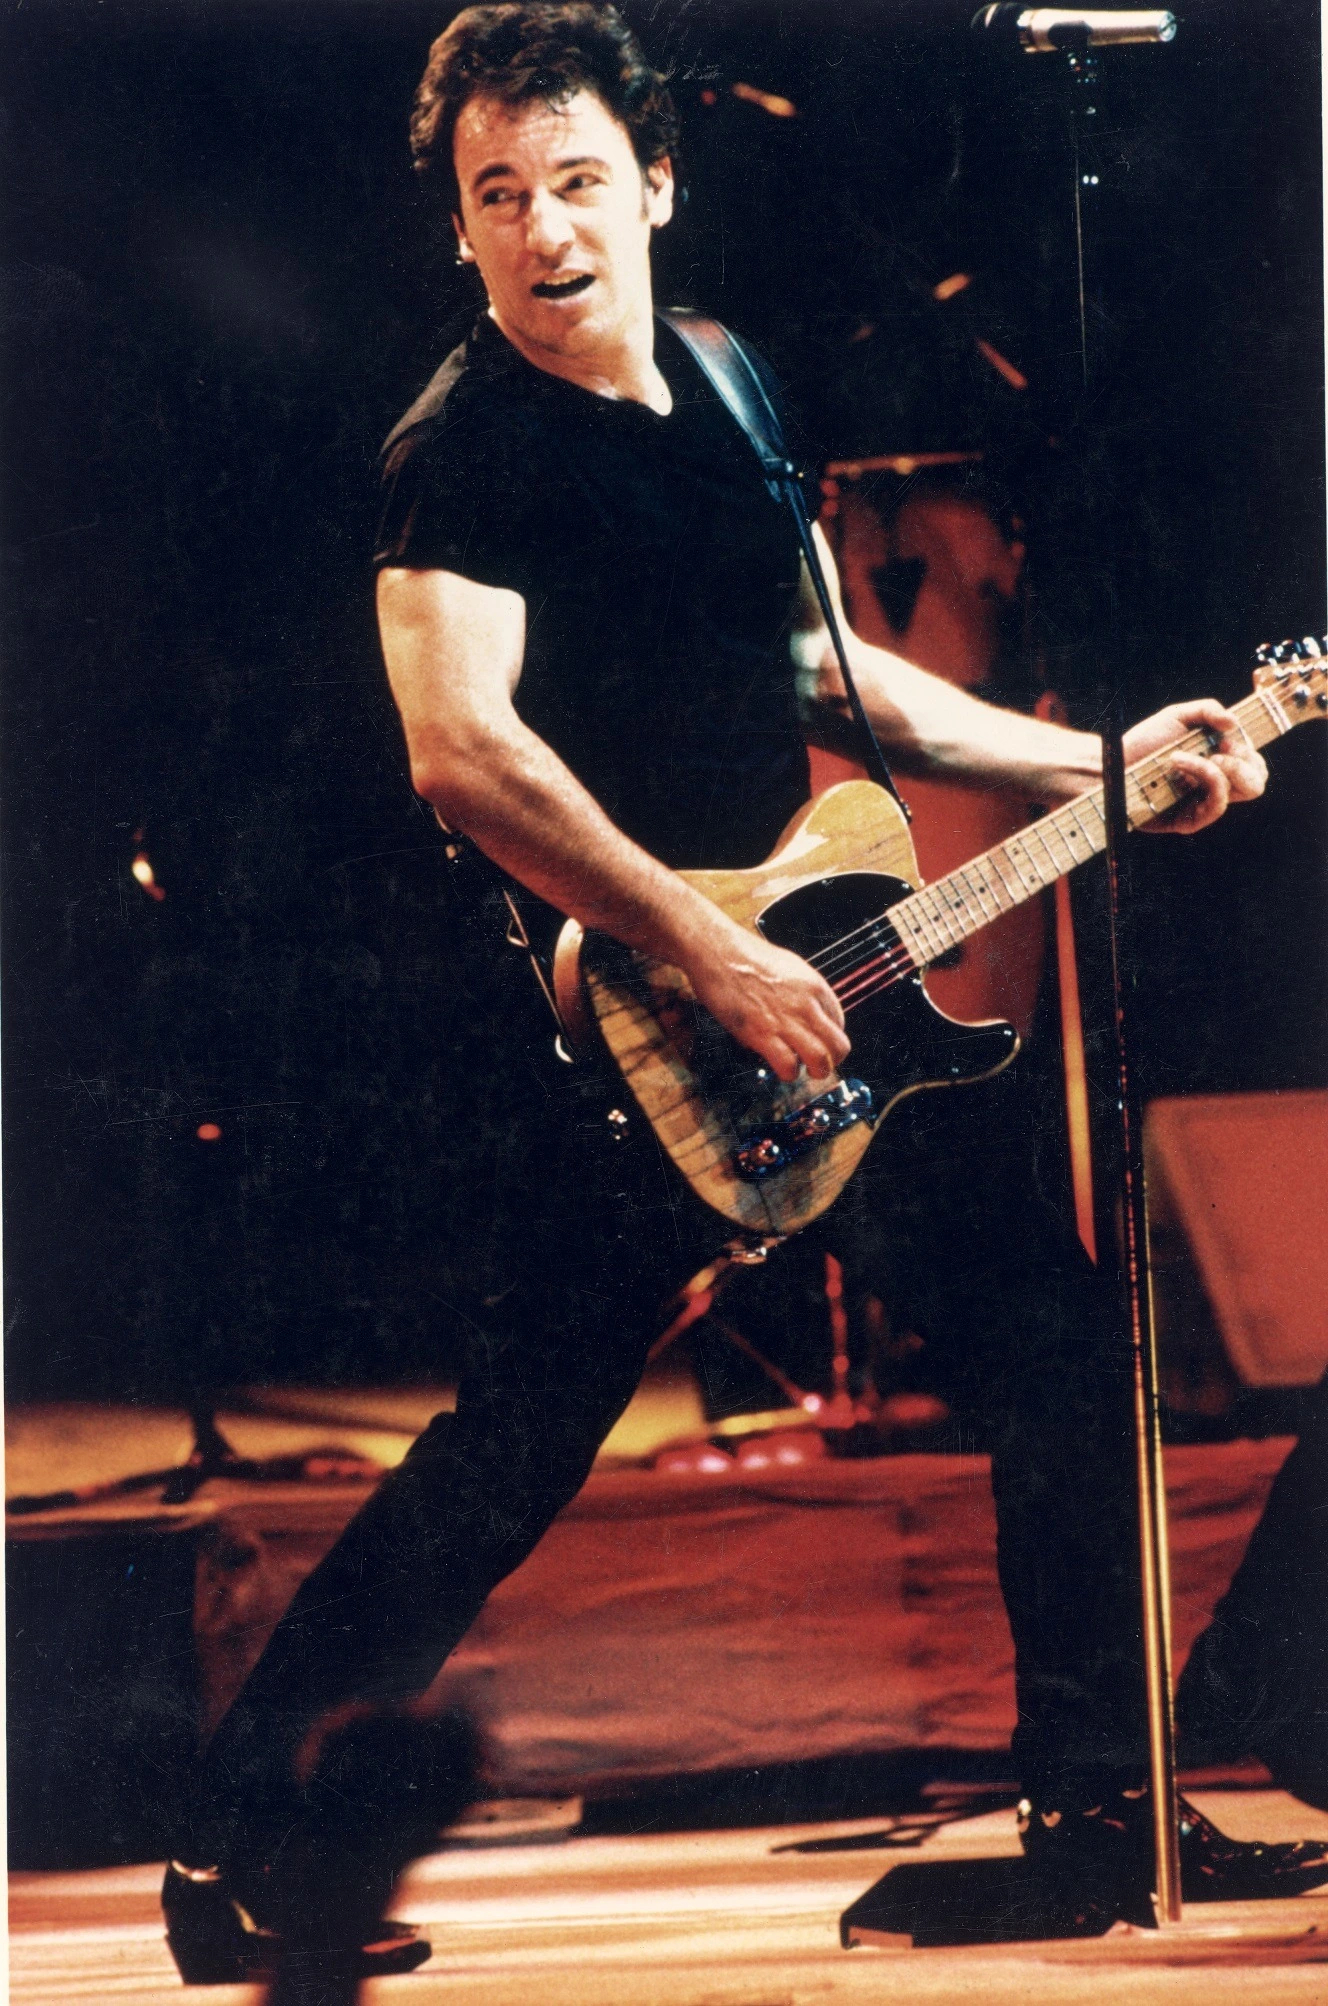 1328x2006 Bruce Springsteen: 30 Photos From His Life and Music Career